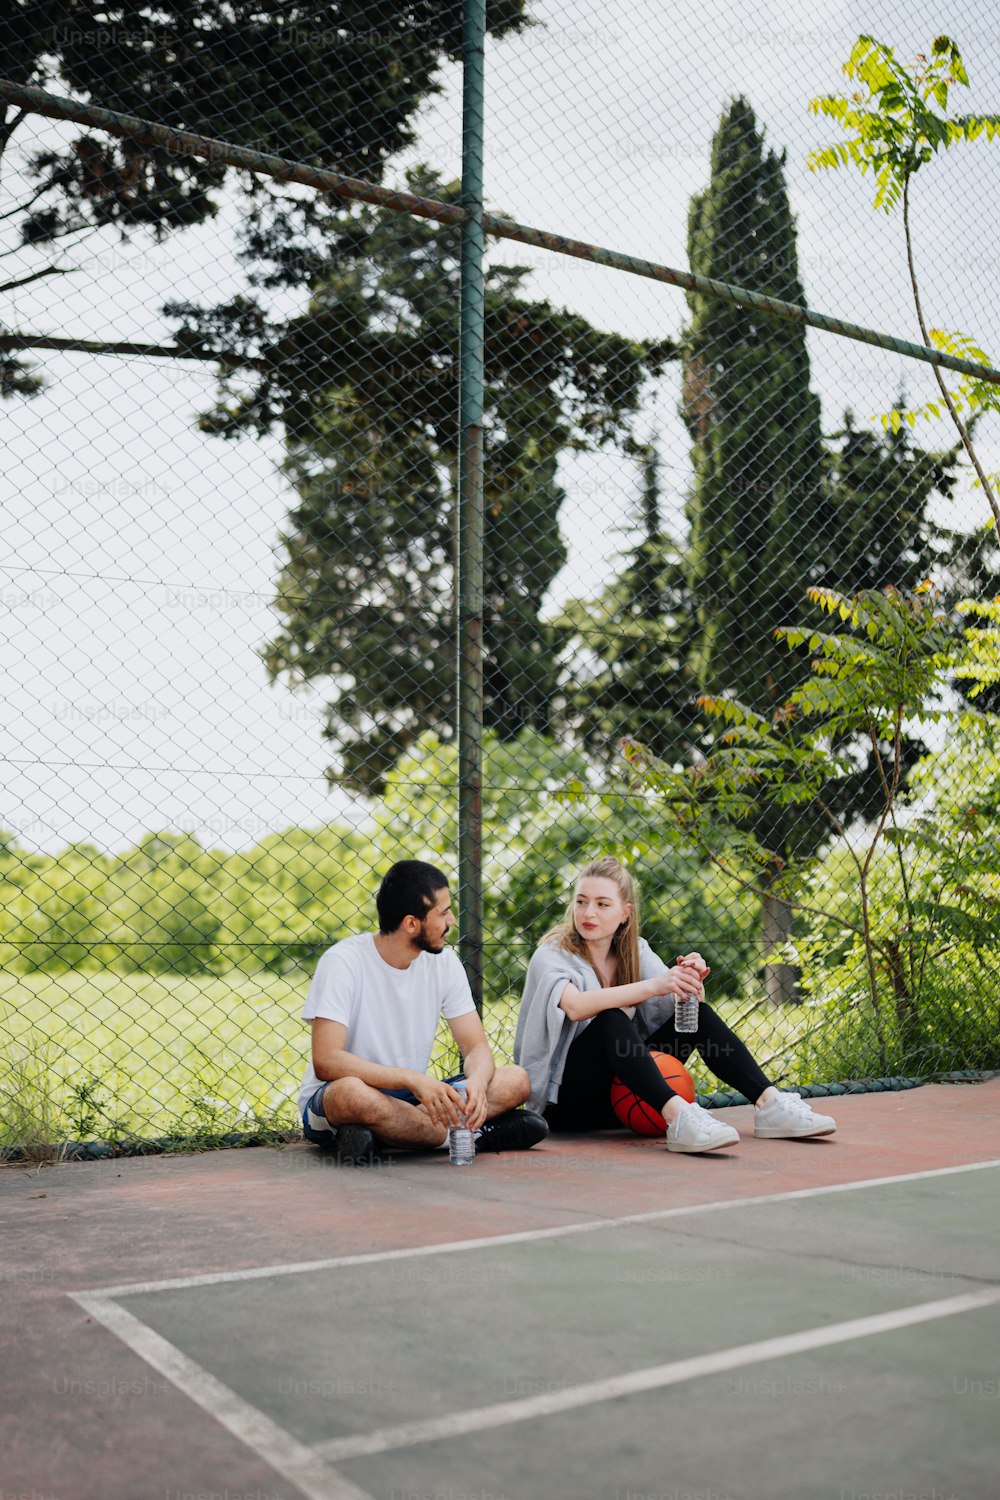 a man and a woman sitting on a tennis court